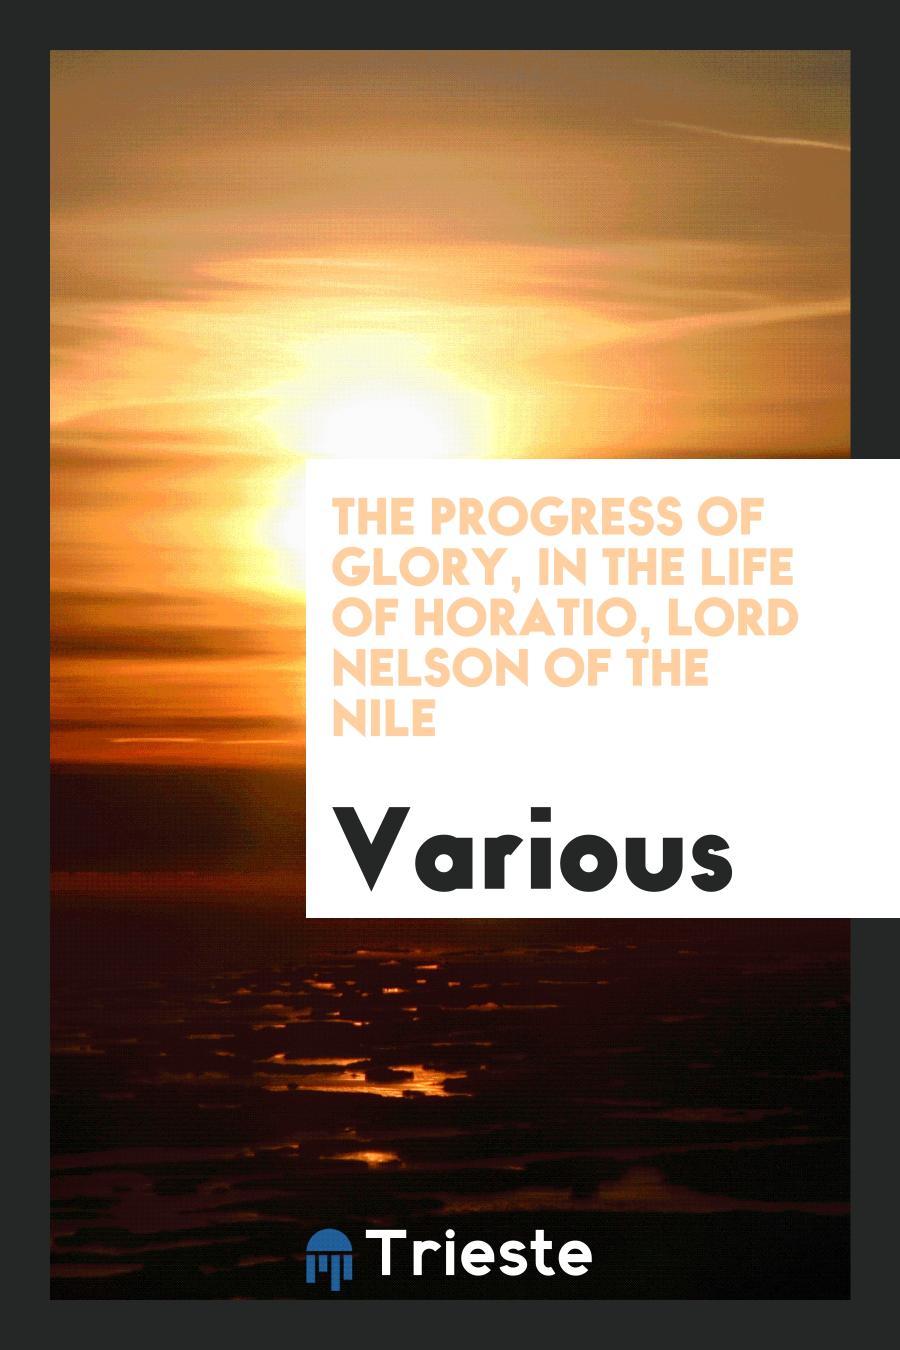 The progress of glory, in the life of Horatio, lord Nelson of the Nile